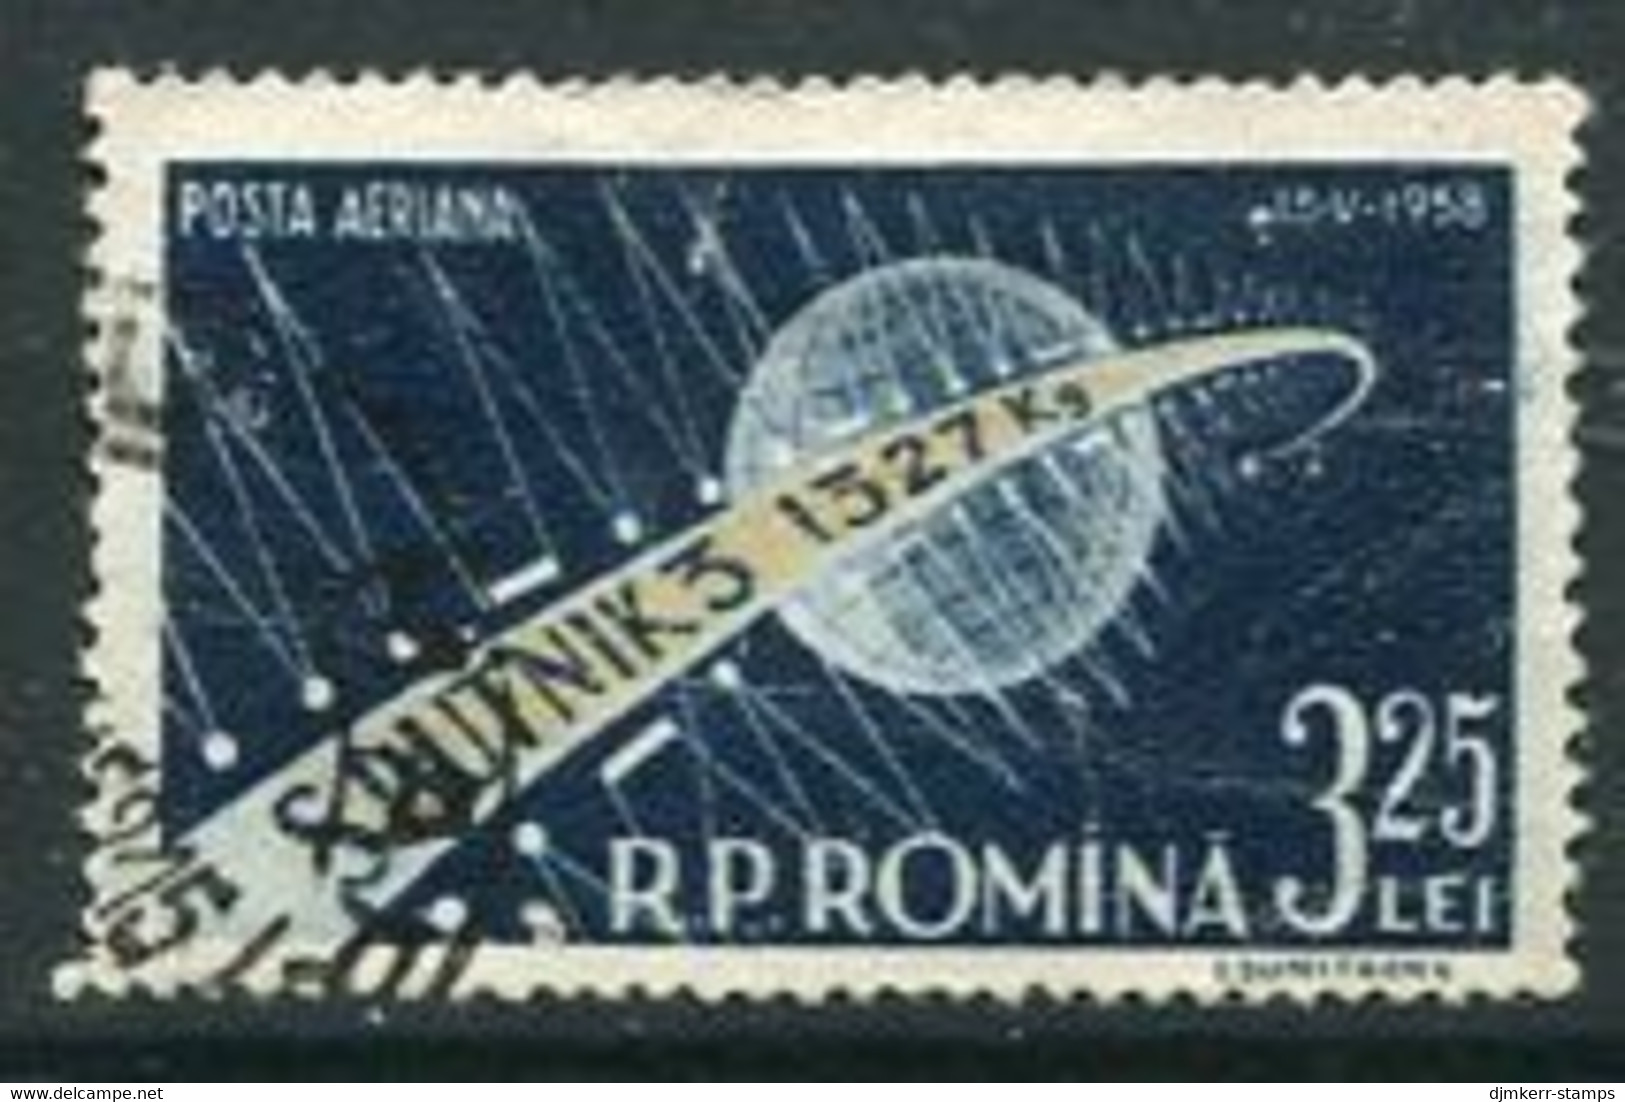 ROMANIA 1958 Launch Of Sputnik 3 Satellite Used.  Michel 1733 - Used Stamps